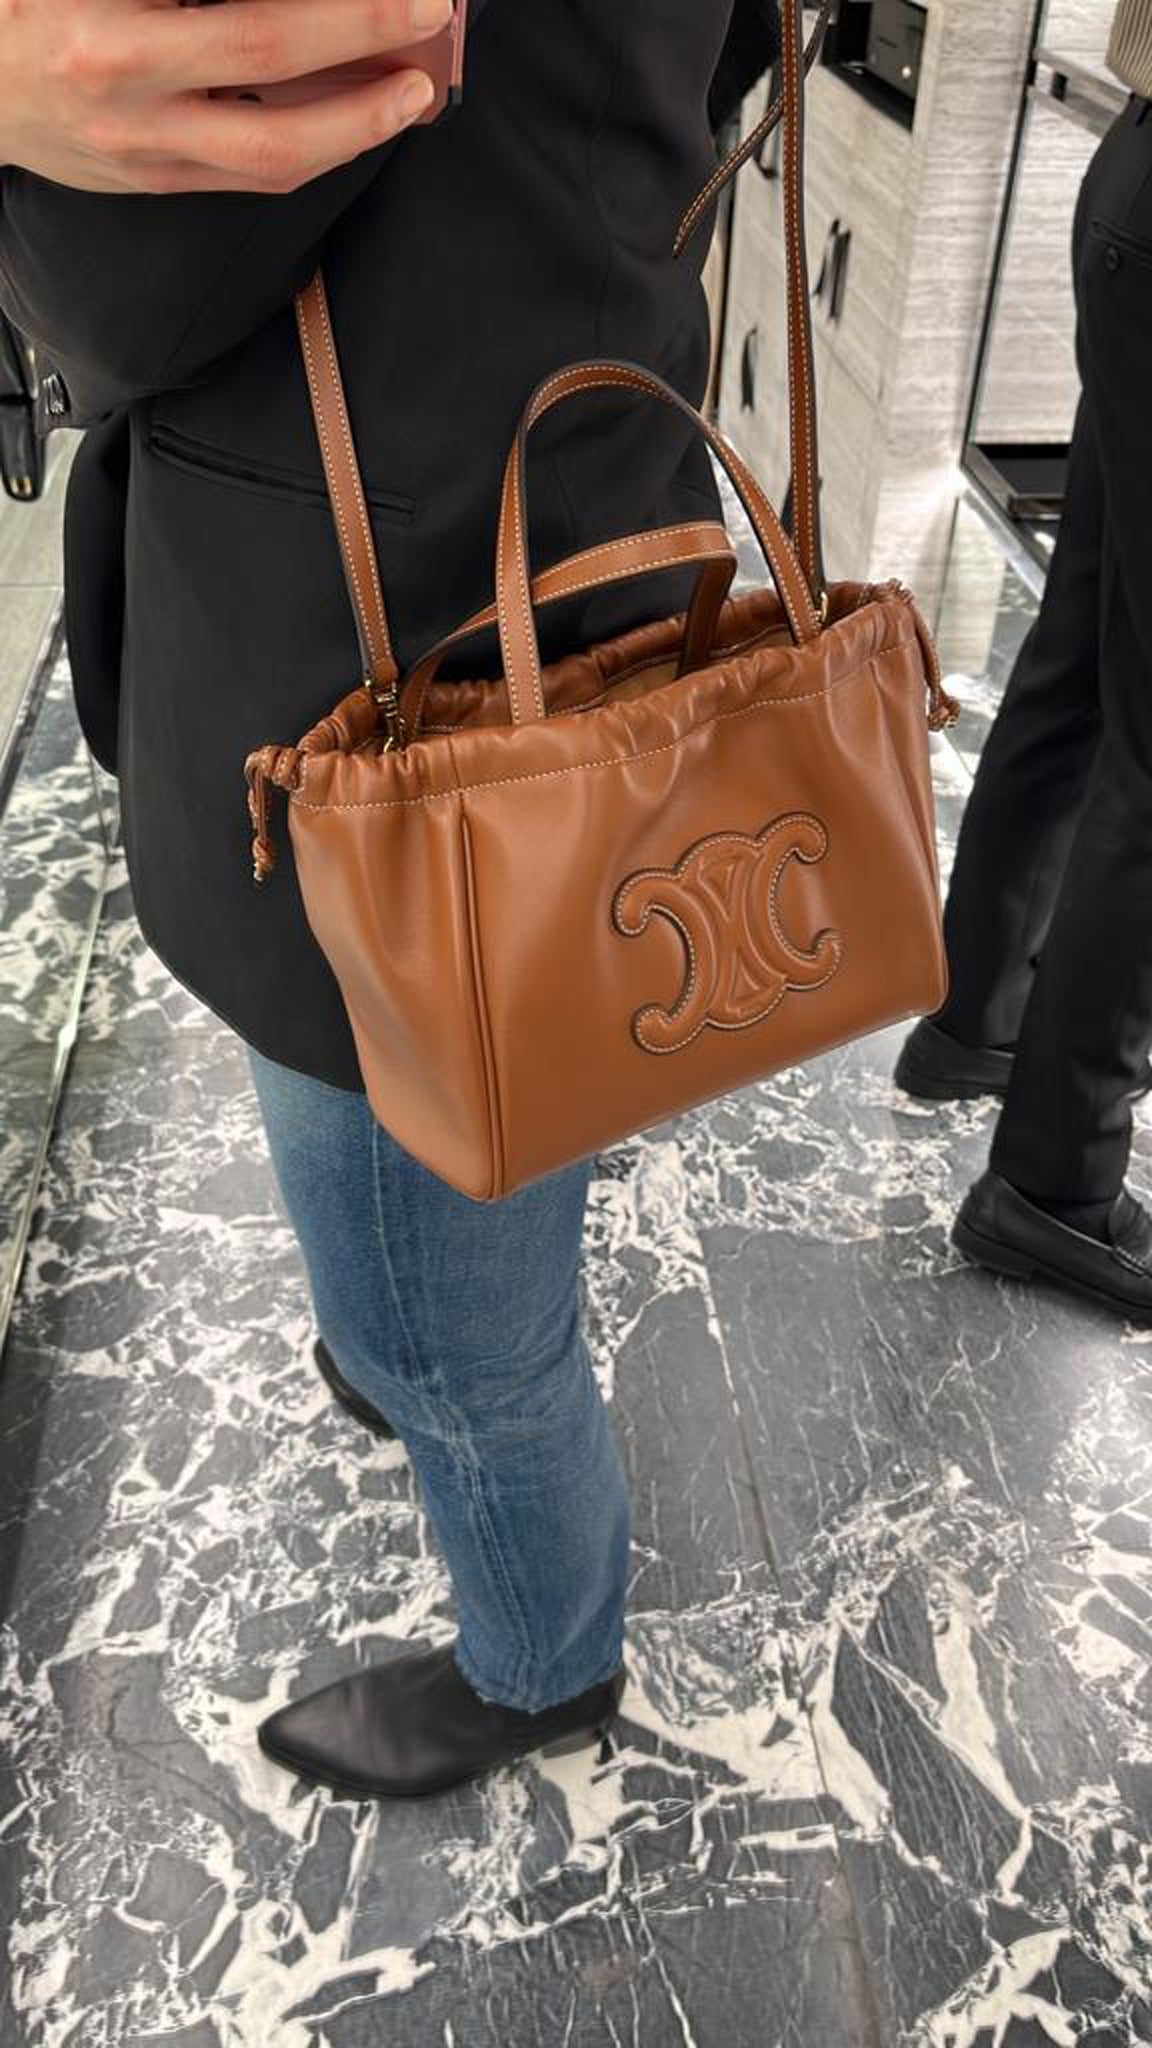 Celine Summer 2018 Bag Collection Features The Purse Bag - Spotted Fashion